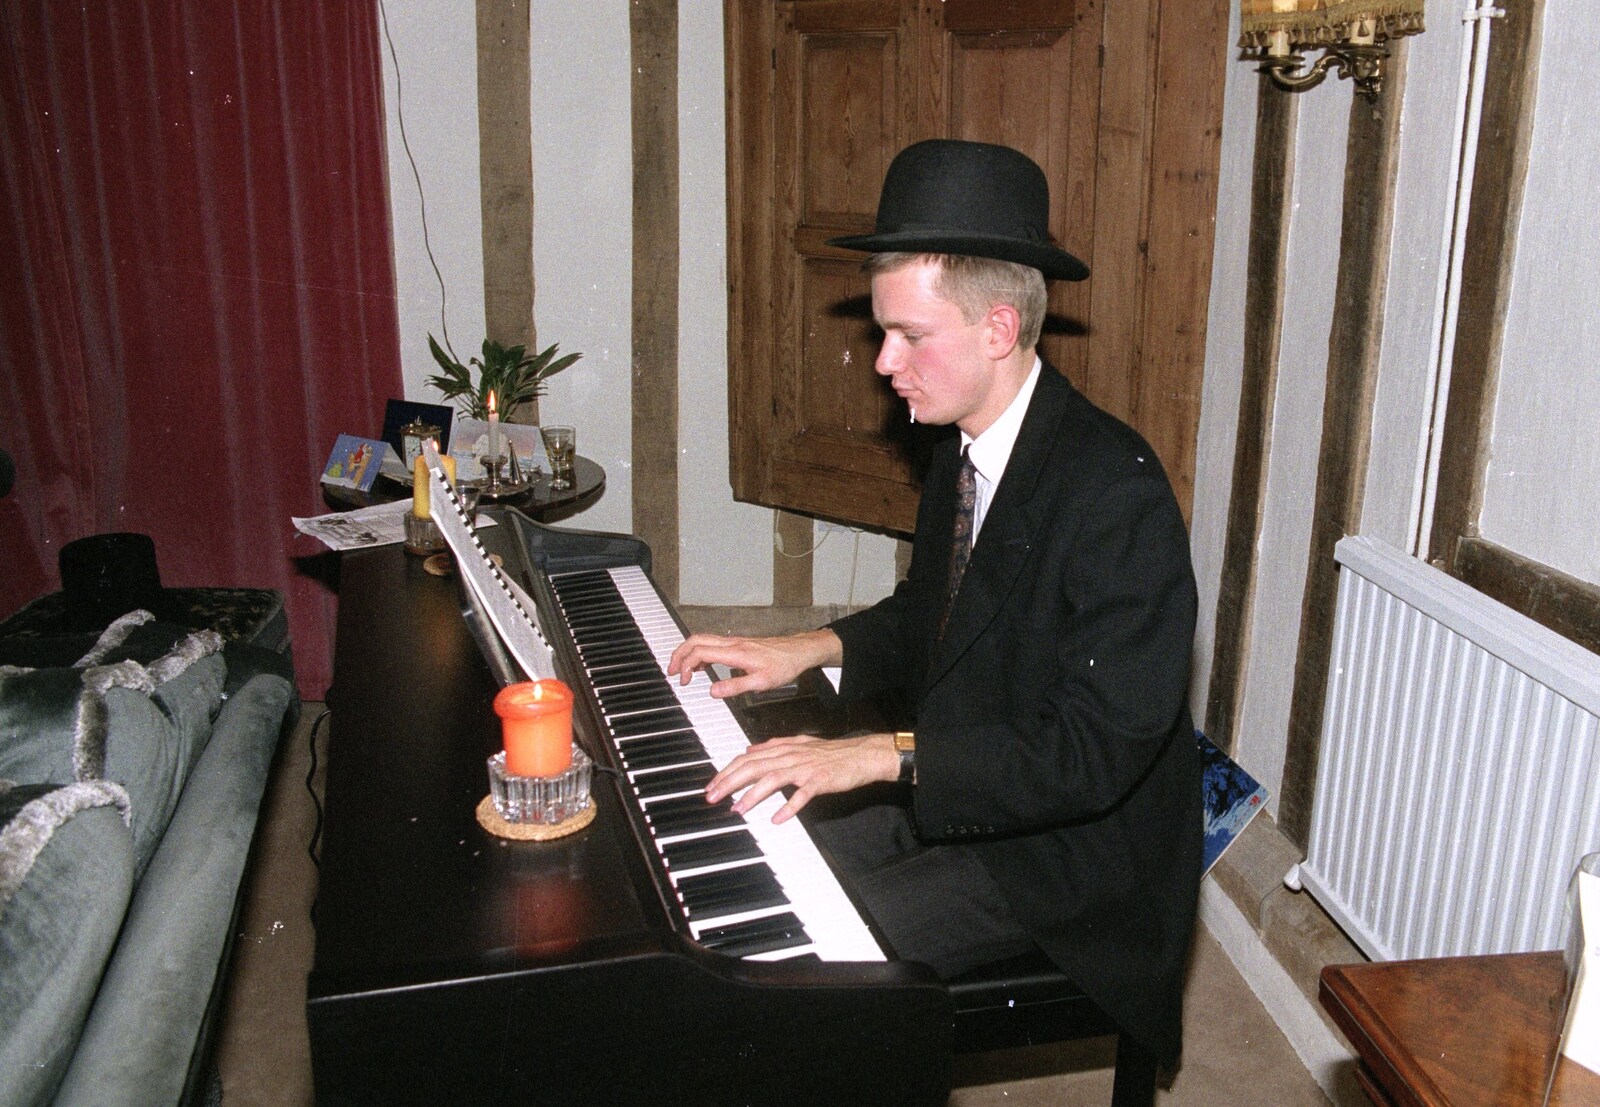 Nosher plays piano from Christmas Dinner with Geoff and Brenda, Stuston, Suffolk - 25th December 1990